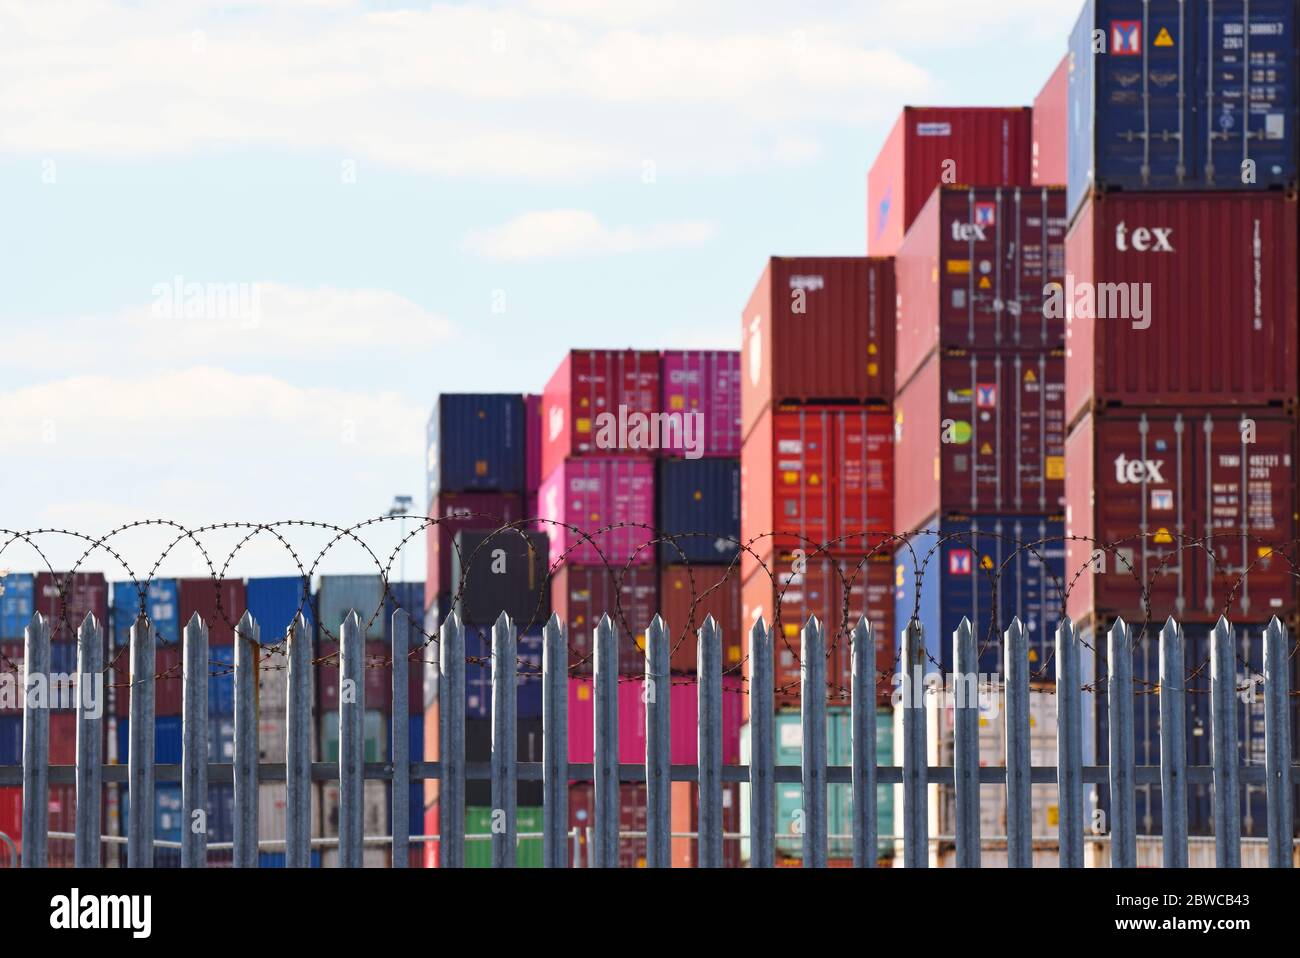 Freight shipping containers stacked behind a fence topped with barbed wire at one of the UK’s busiest ports Stock Photo